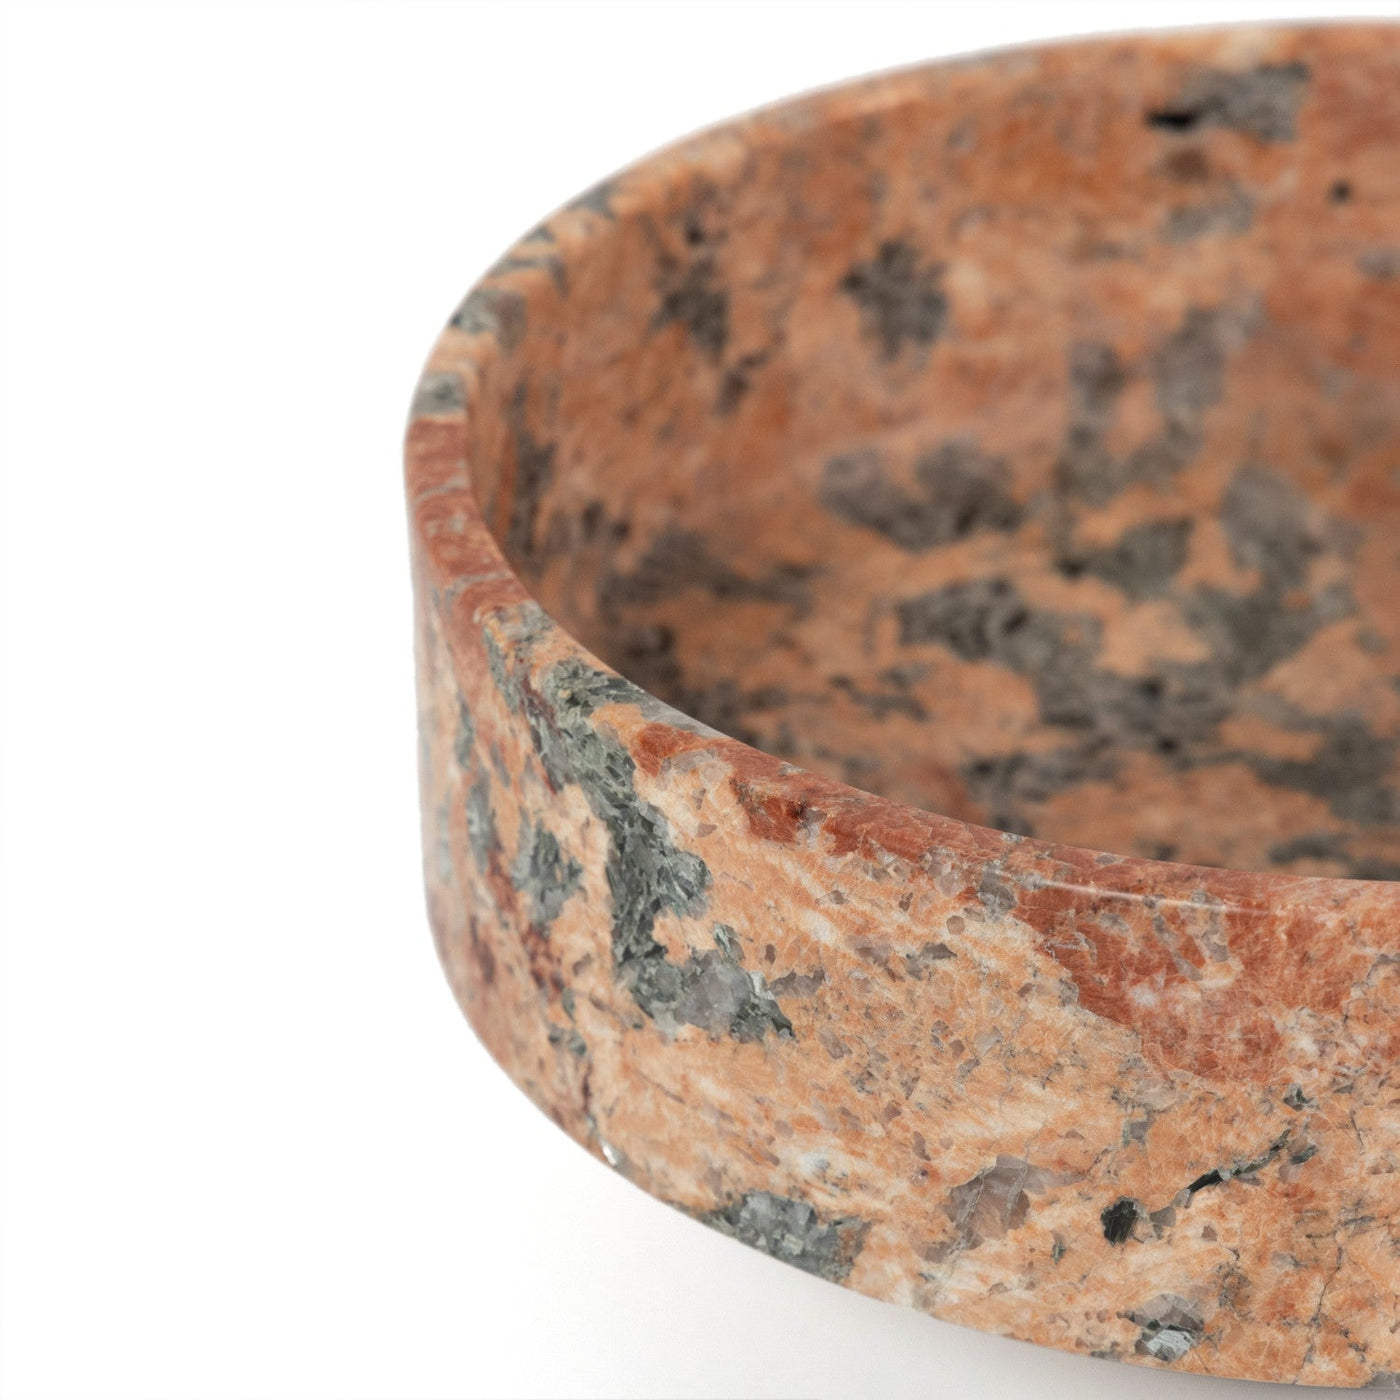 FRAY BOWL-RED DUNE MARBLE